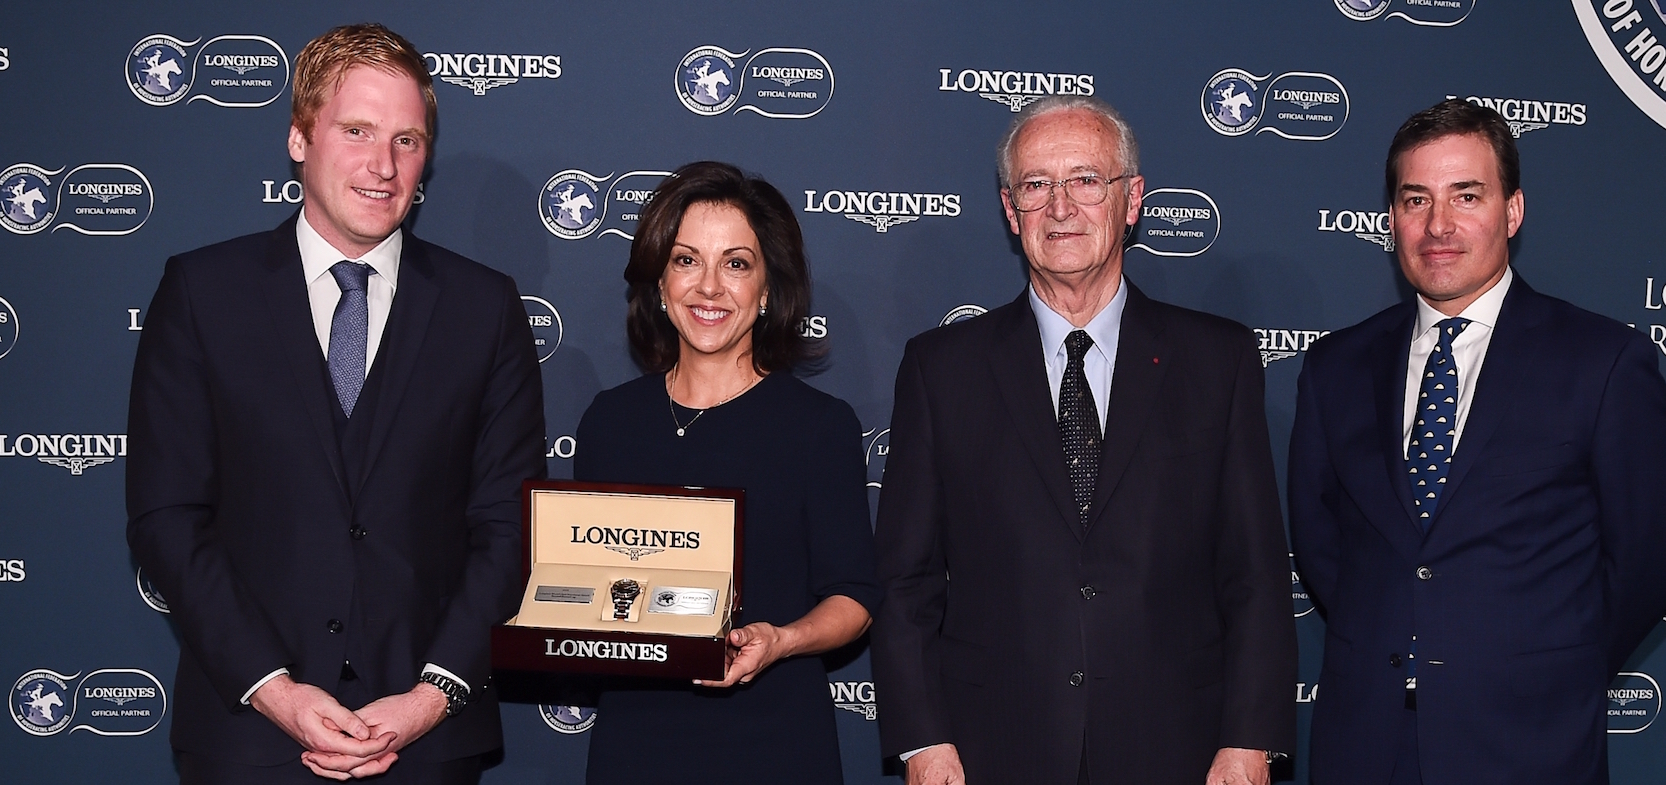 Accelerate's co-owner Stephanie Hronis receives the award for third best racehorse in the world at the Longines ceremony in London yesterday. She is pictured with, from left, Benjamin Aeby (Longines International Sponsorship & Events Manager), Louis Romanet (chairman of the International Federation of Horseracing Authorities) and Jim Gagliano (IFHA vice-chairman). Photo: Longines